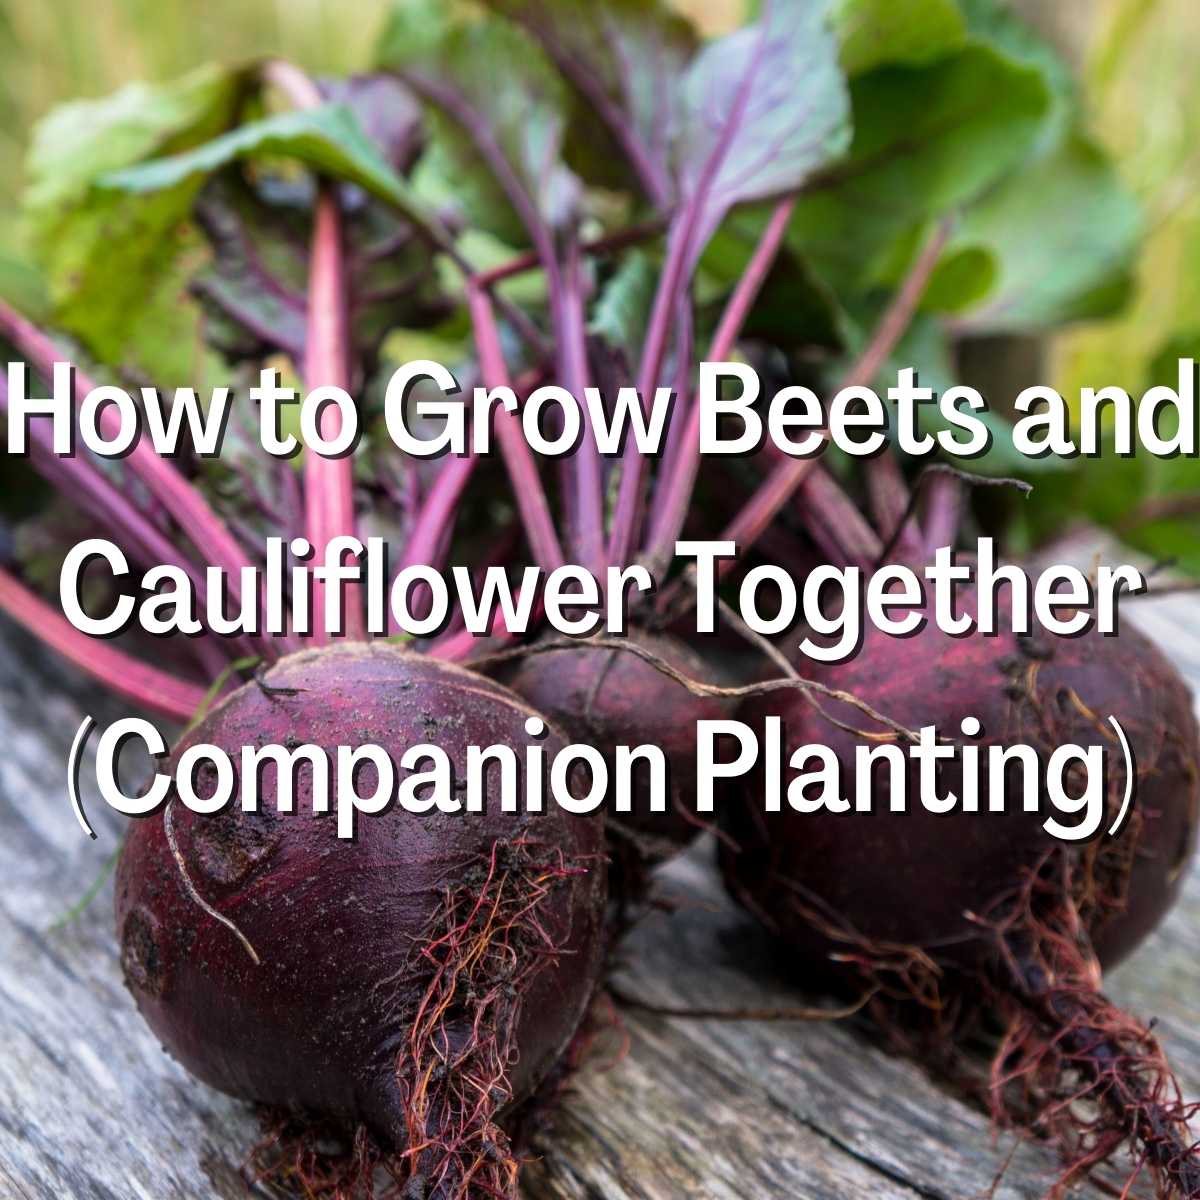 How to Grow Beets and Cauliflower Together